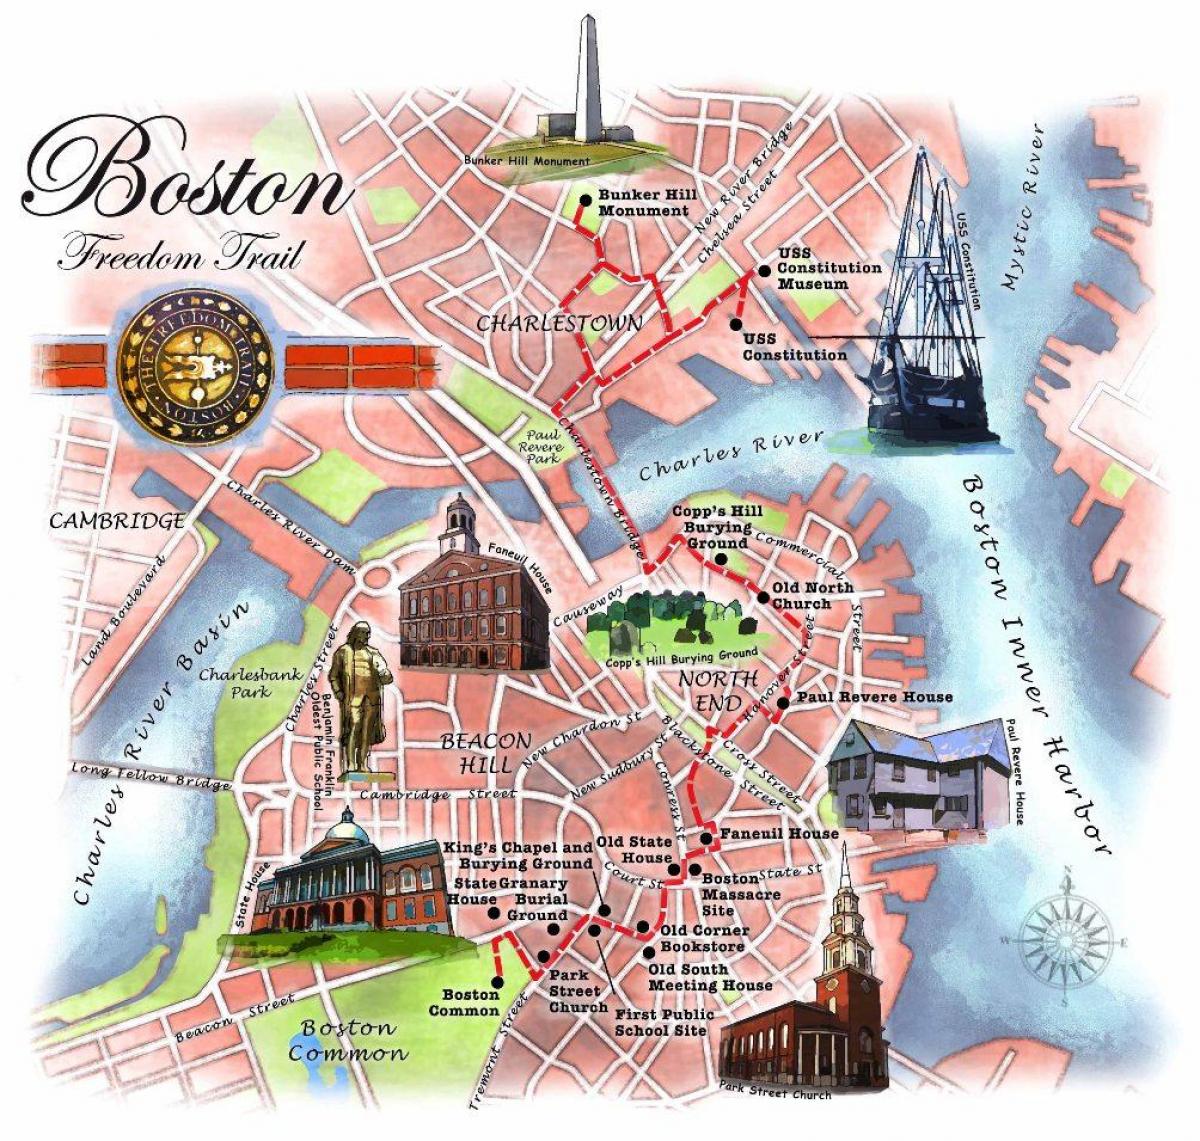 Boston Freedom Trail Map One Road At A Time